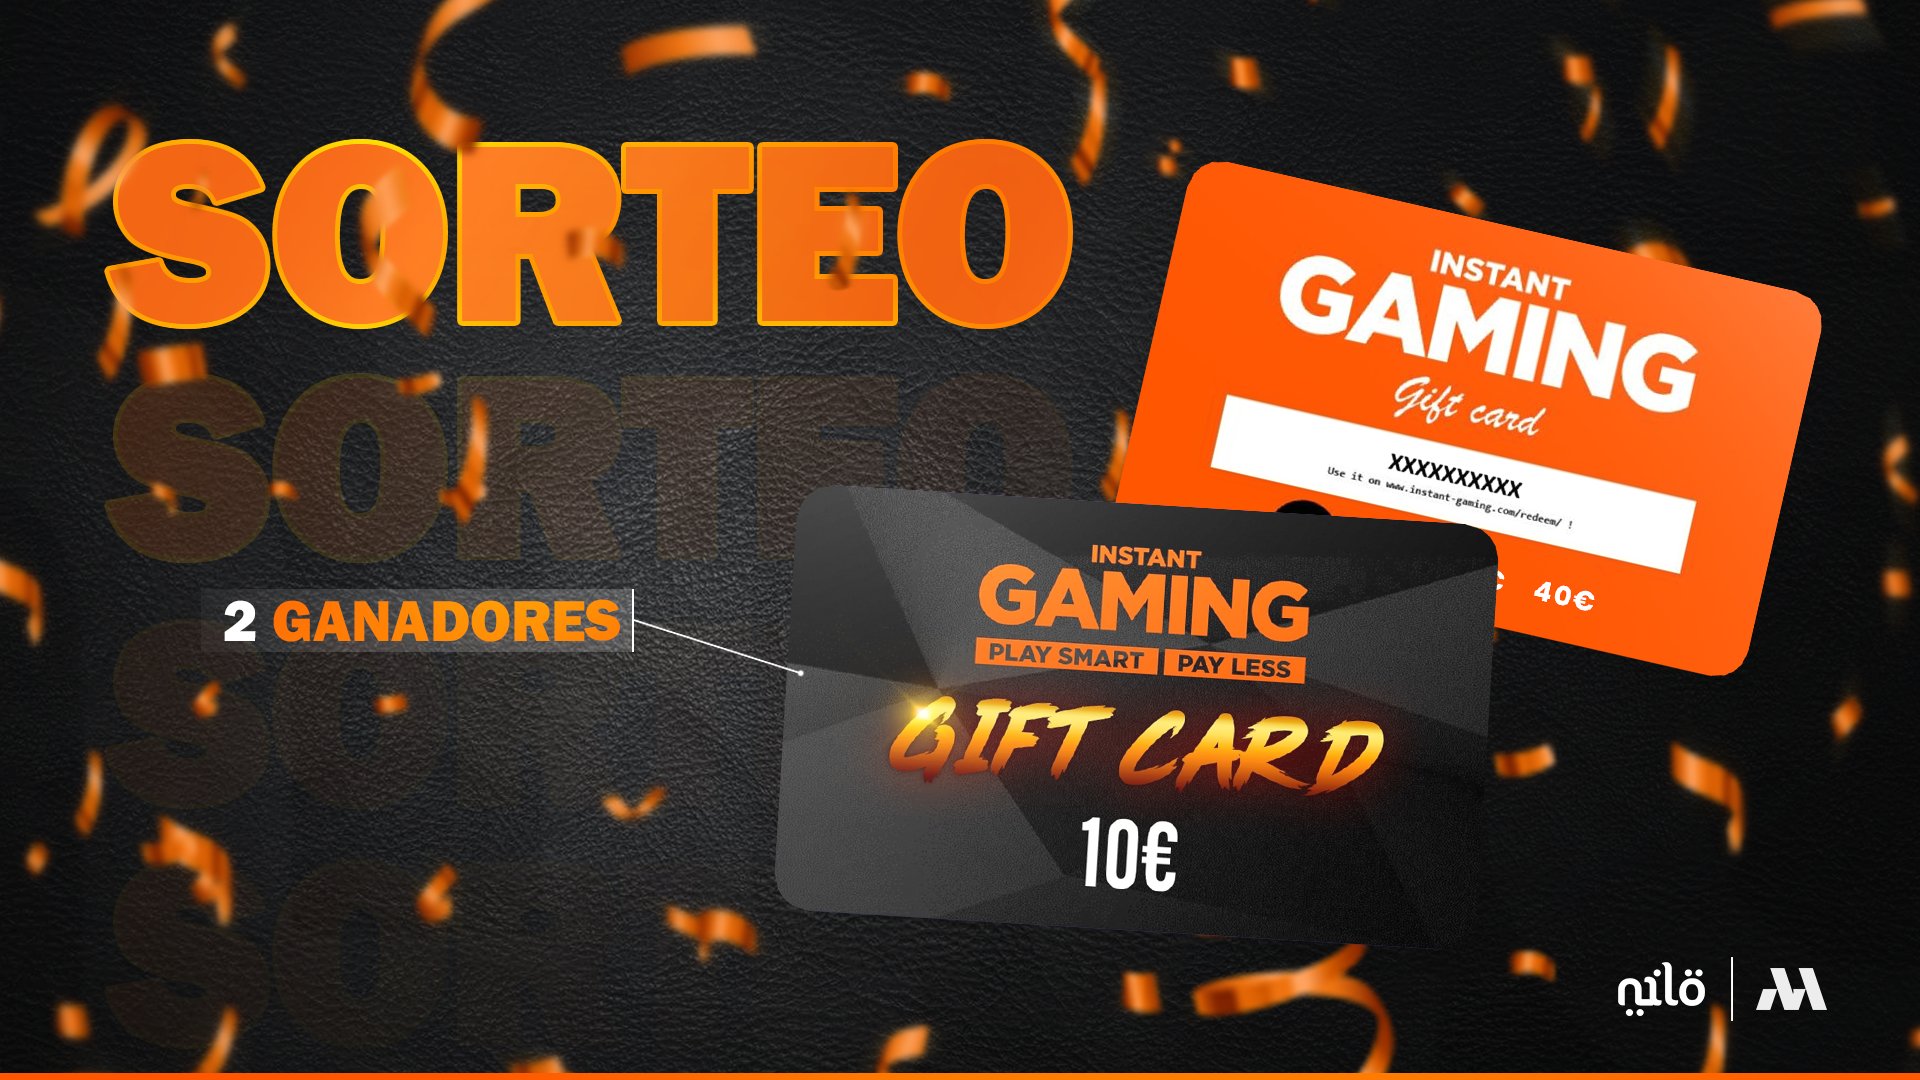 How to Redeem Instant Gaming Gift Cards